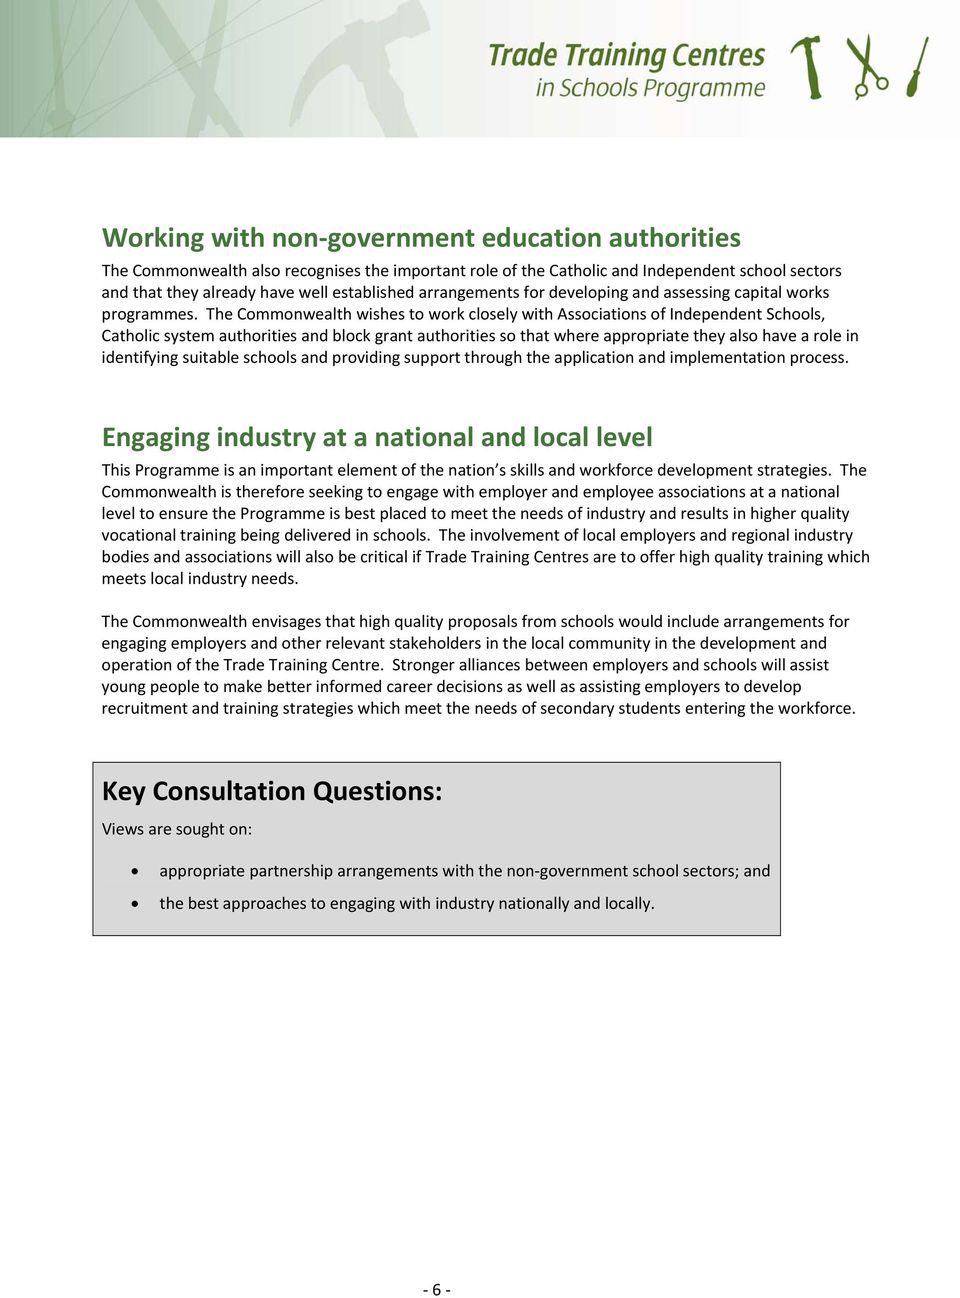 The Commonwealth wishes to work closely with Associations of Independent Schools, Catholic system authorities and block grant authorities so that where appropriate they also have a role in